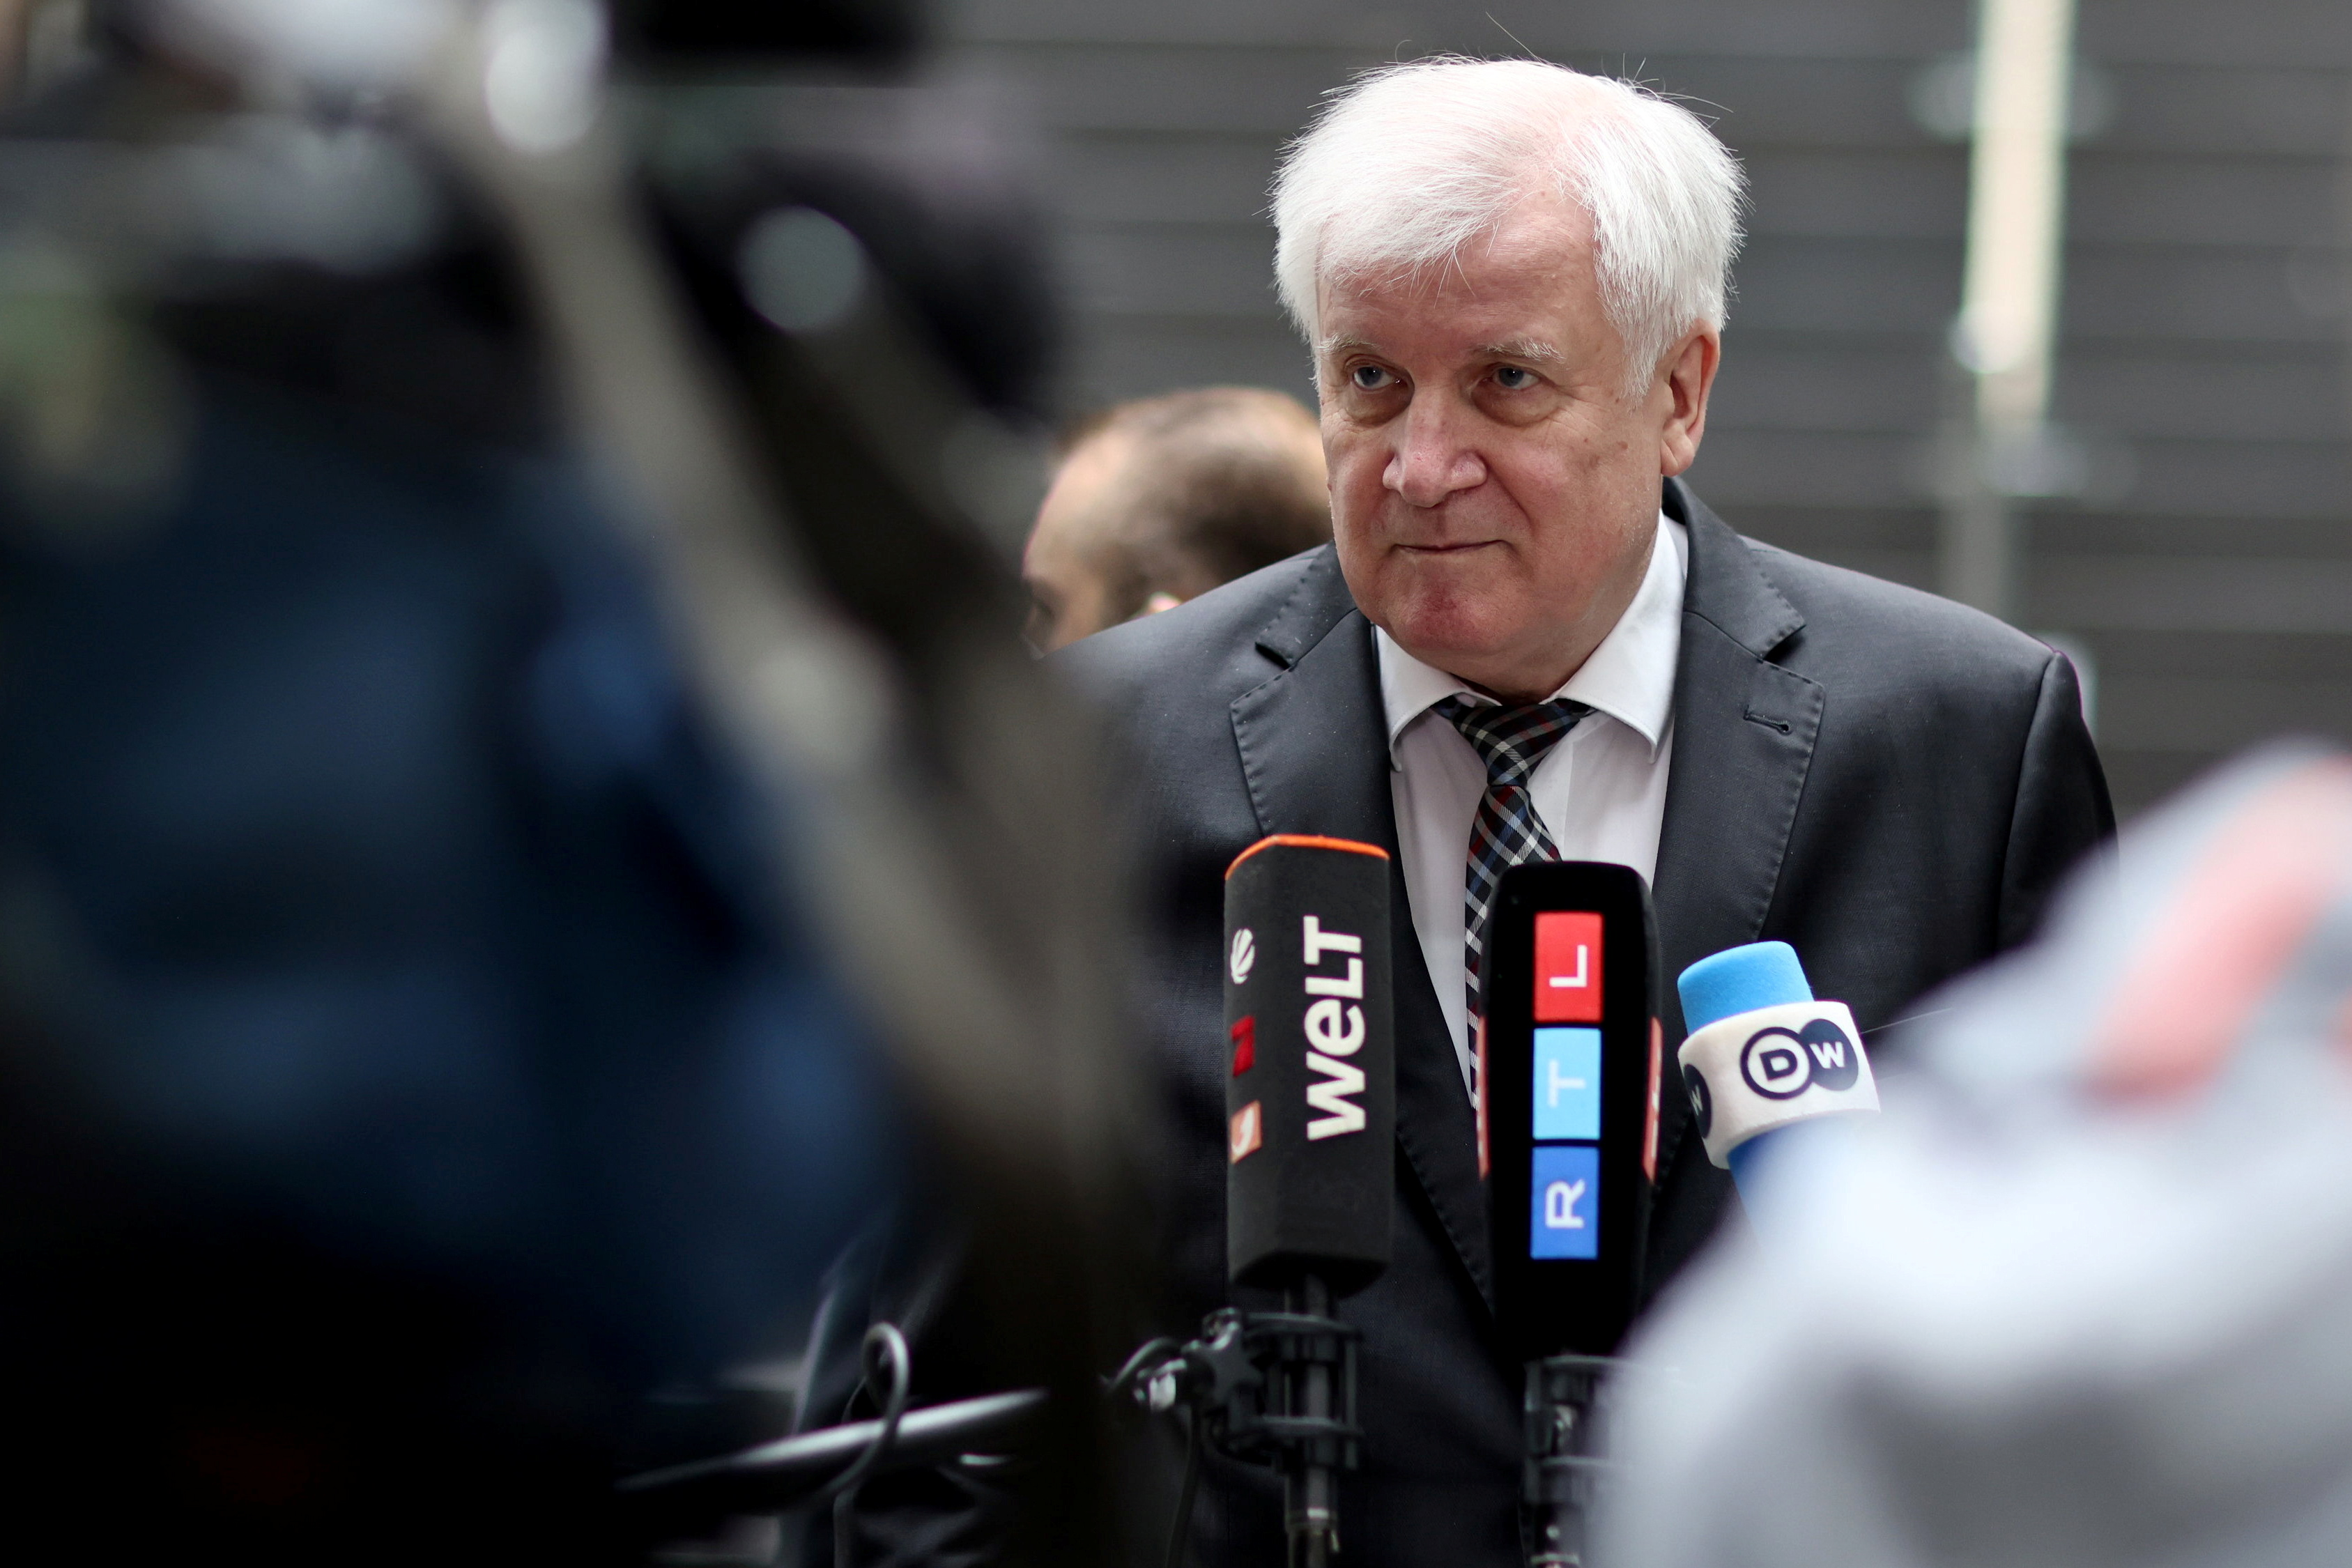 Germany's Interior Minister Horst Seehofer speaks to the media, in Berlin, Germany, October 20, 2021. REUTERS/Christian Mang